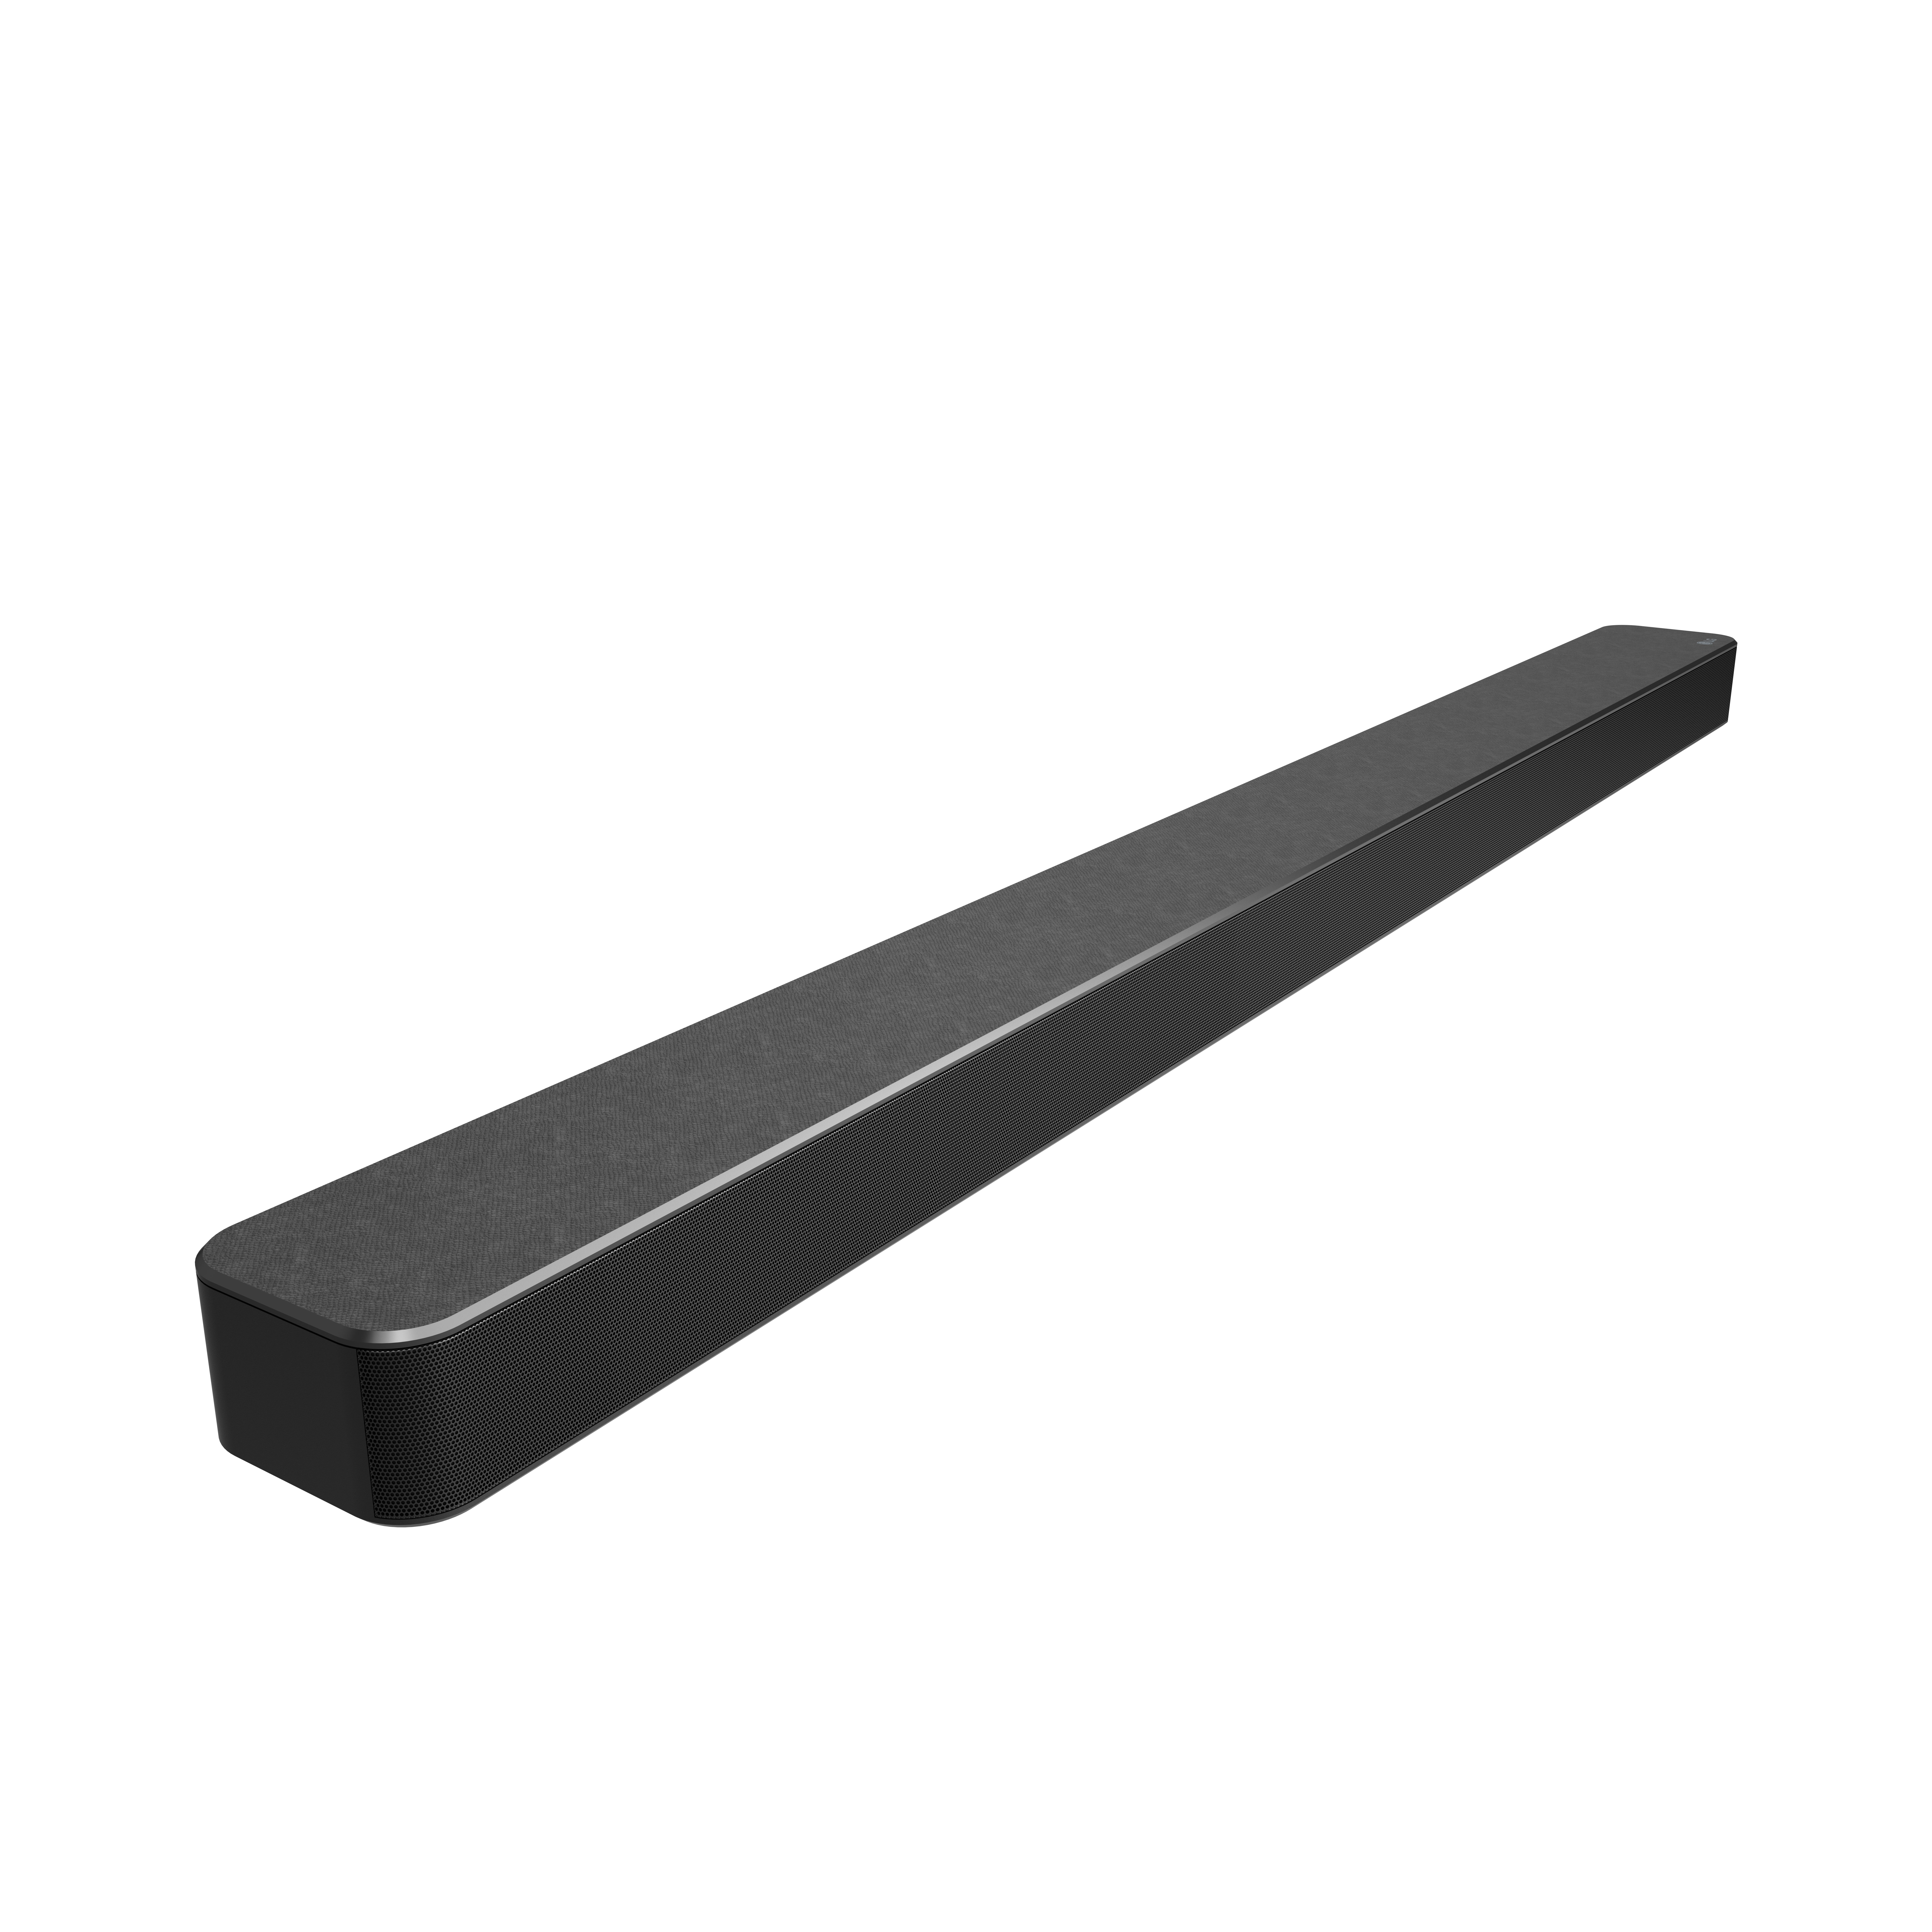 LG 3.1.2 Channel High Res Audio Soundbar with Dolby Atmos® and Goolge Assitant Built-In - SN8YG - image 4 of 17